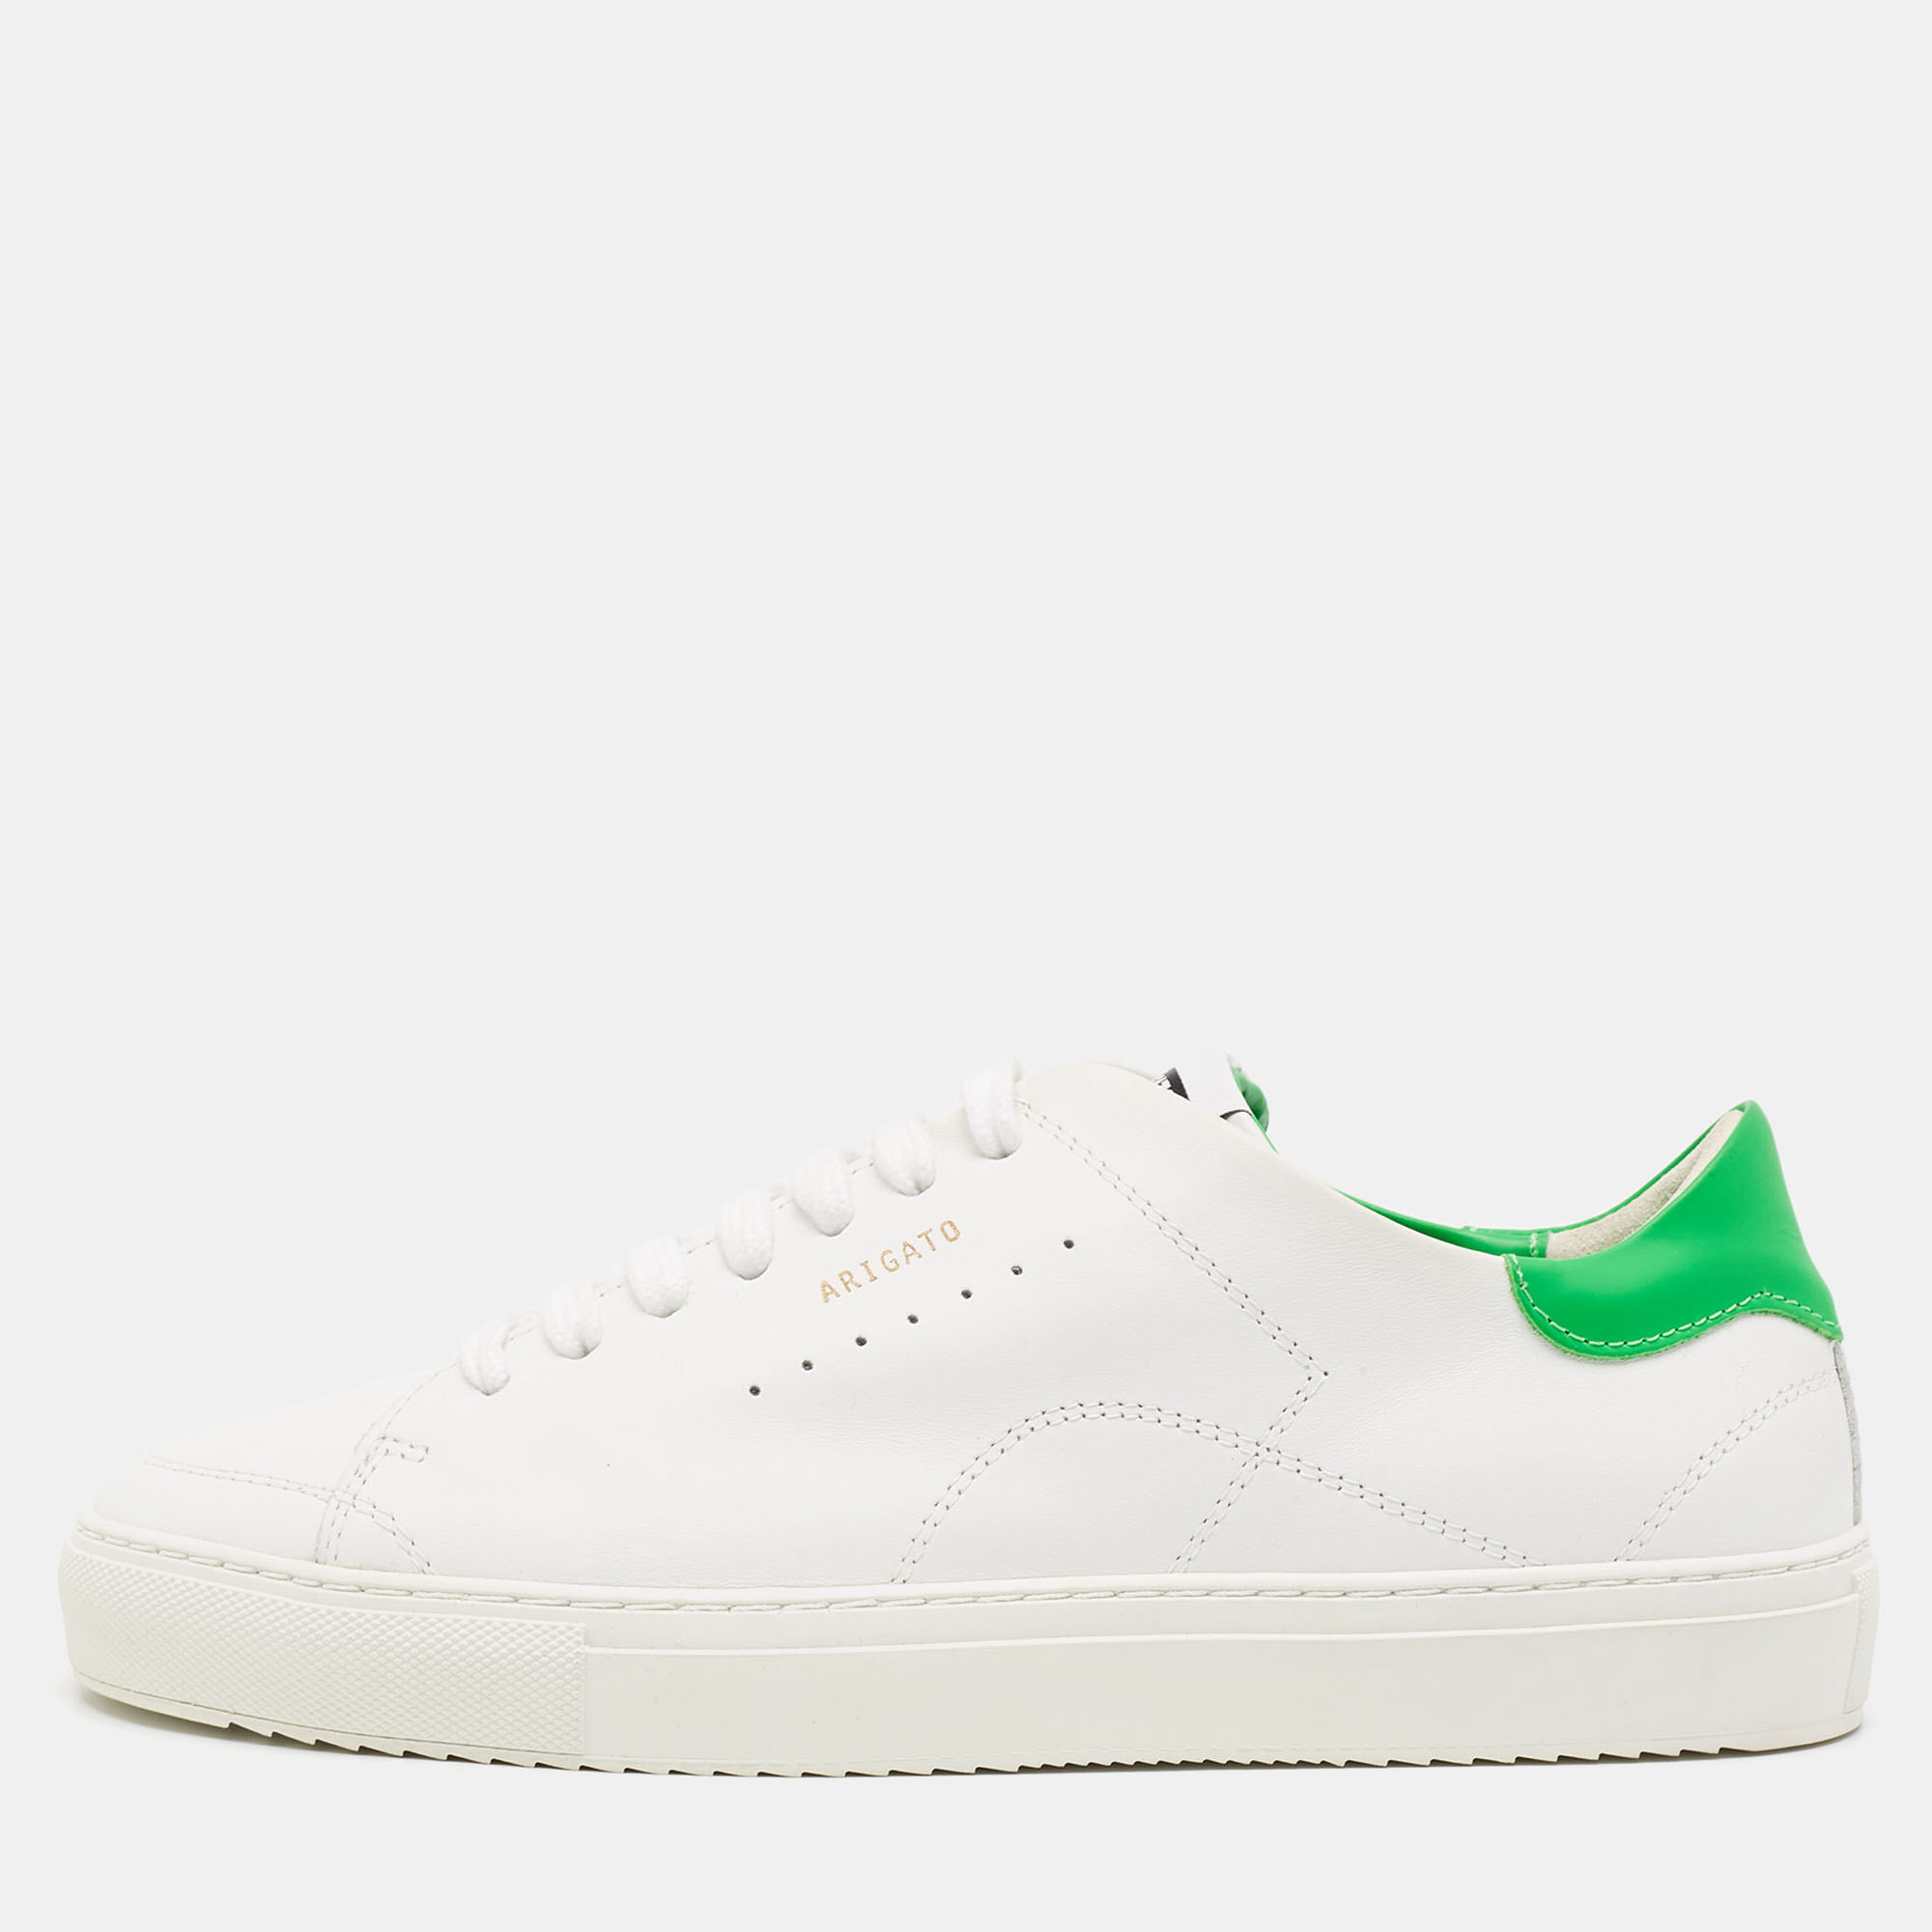 Pre-owned Axel Arigato White/green Leather Clean Sneakers Size 40